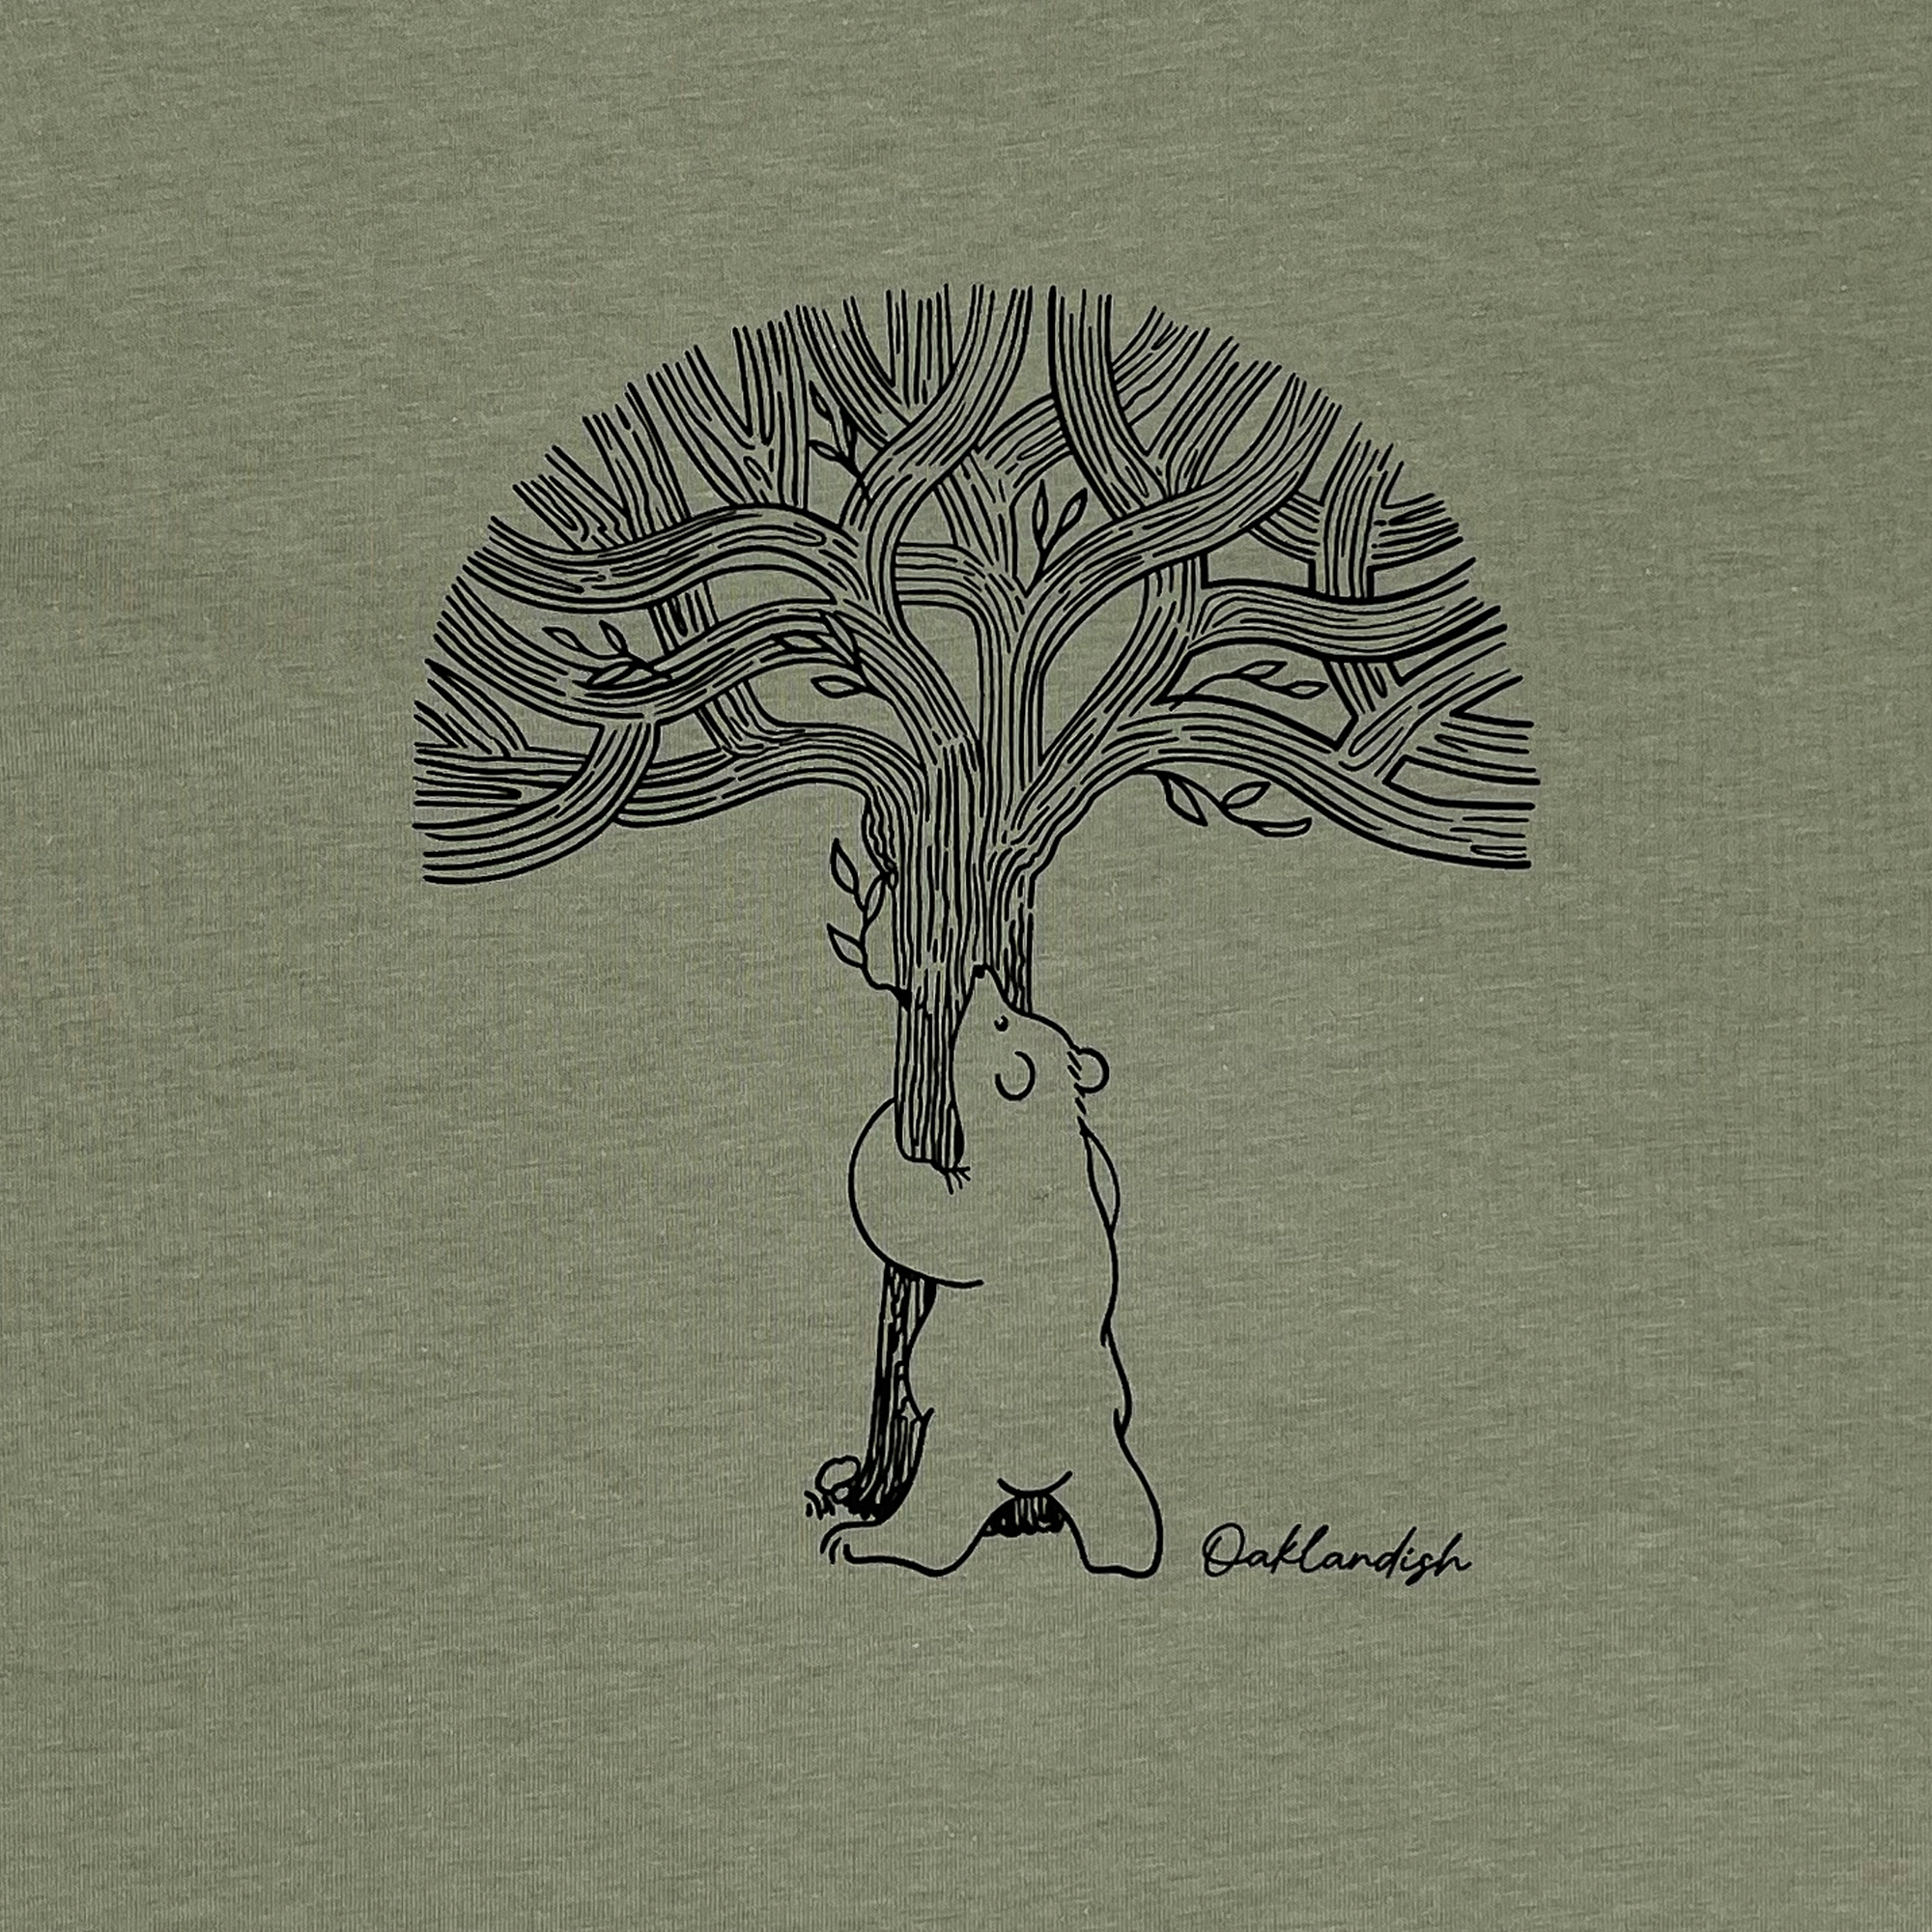 Close-up of line graphic featuring a bear hugging a tree representing Oaklandish with Oaklandish wordmark on Eucalyptus green t-shirt.